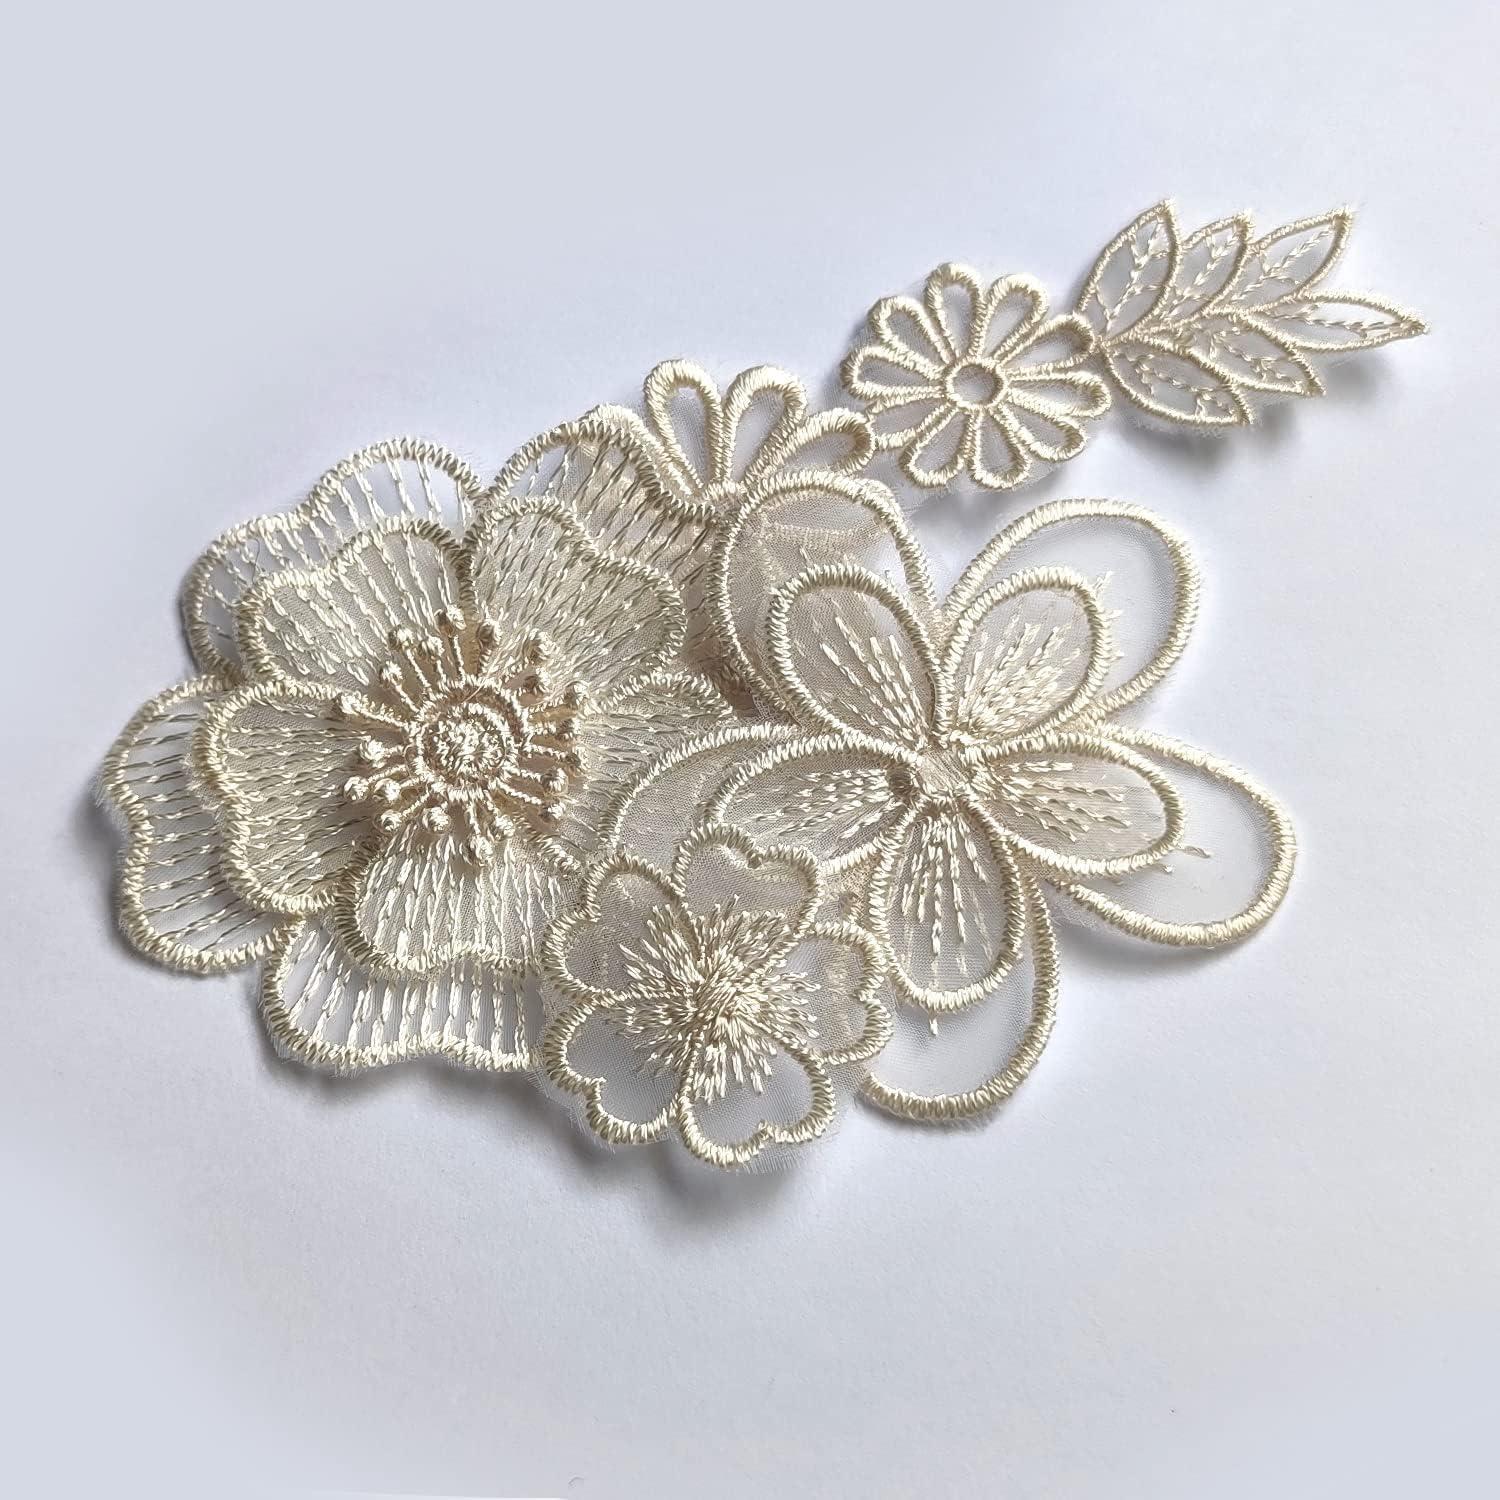 Qililandiy 10 Pcs Beige Mixed Style Embroidery Lace Flower Patches Appliques  DIY Sewing Craft for Decoration, Sew On Patches for Repairing and Decorating